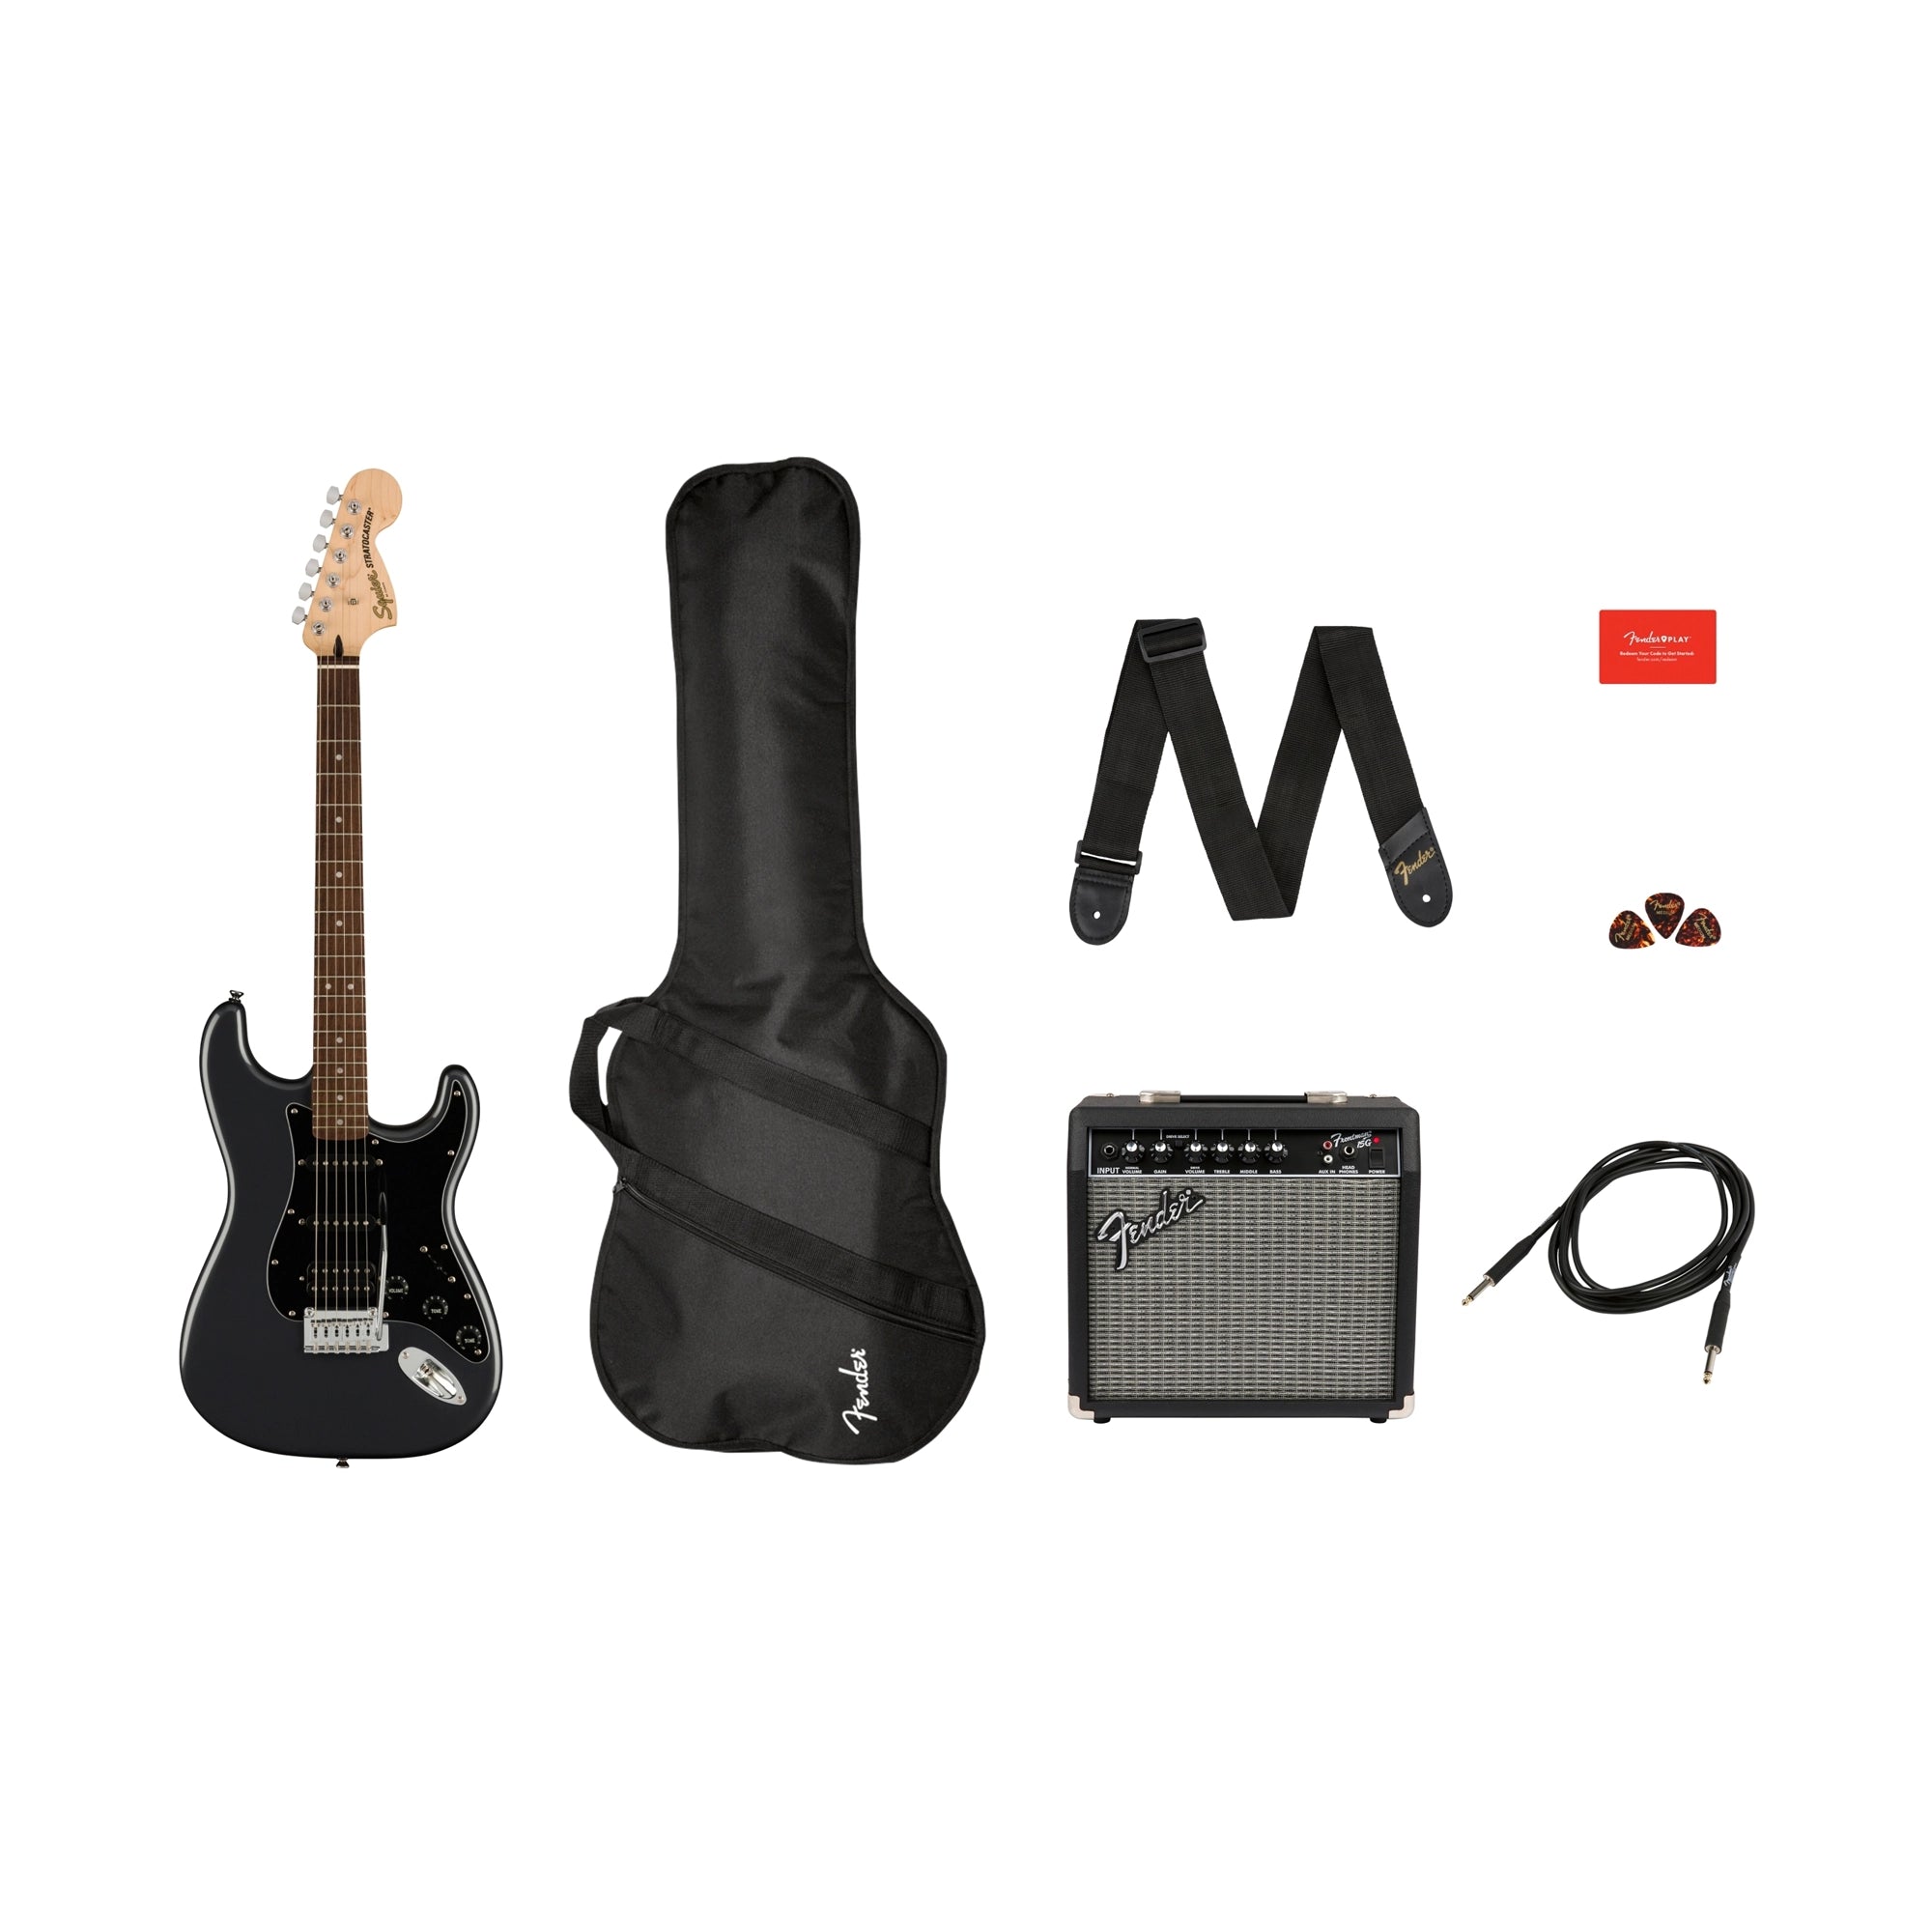 Squier Affinity Series Stratocaster Hss Pack - Charcoal Frost Metallic